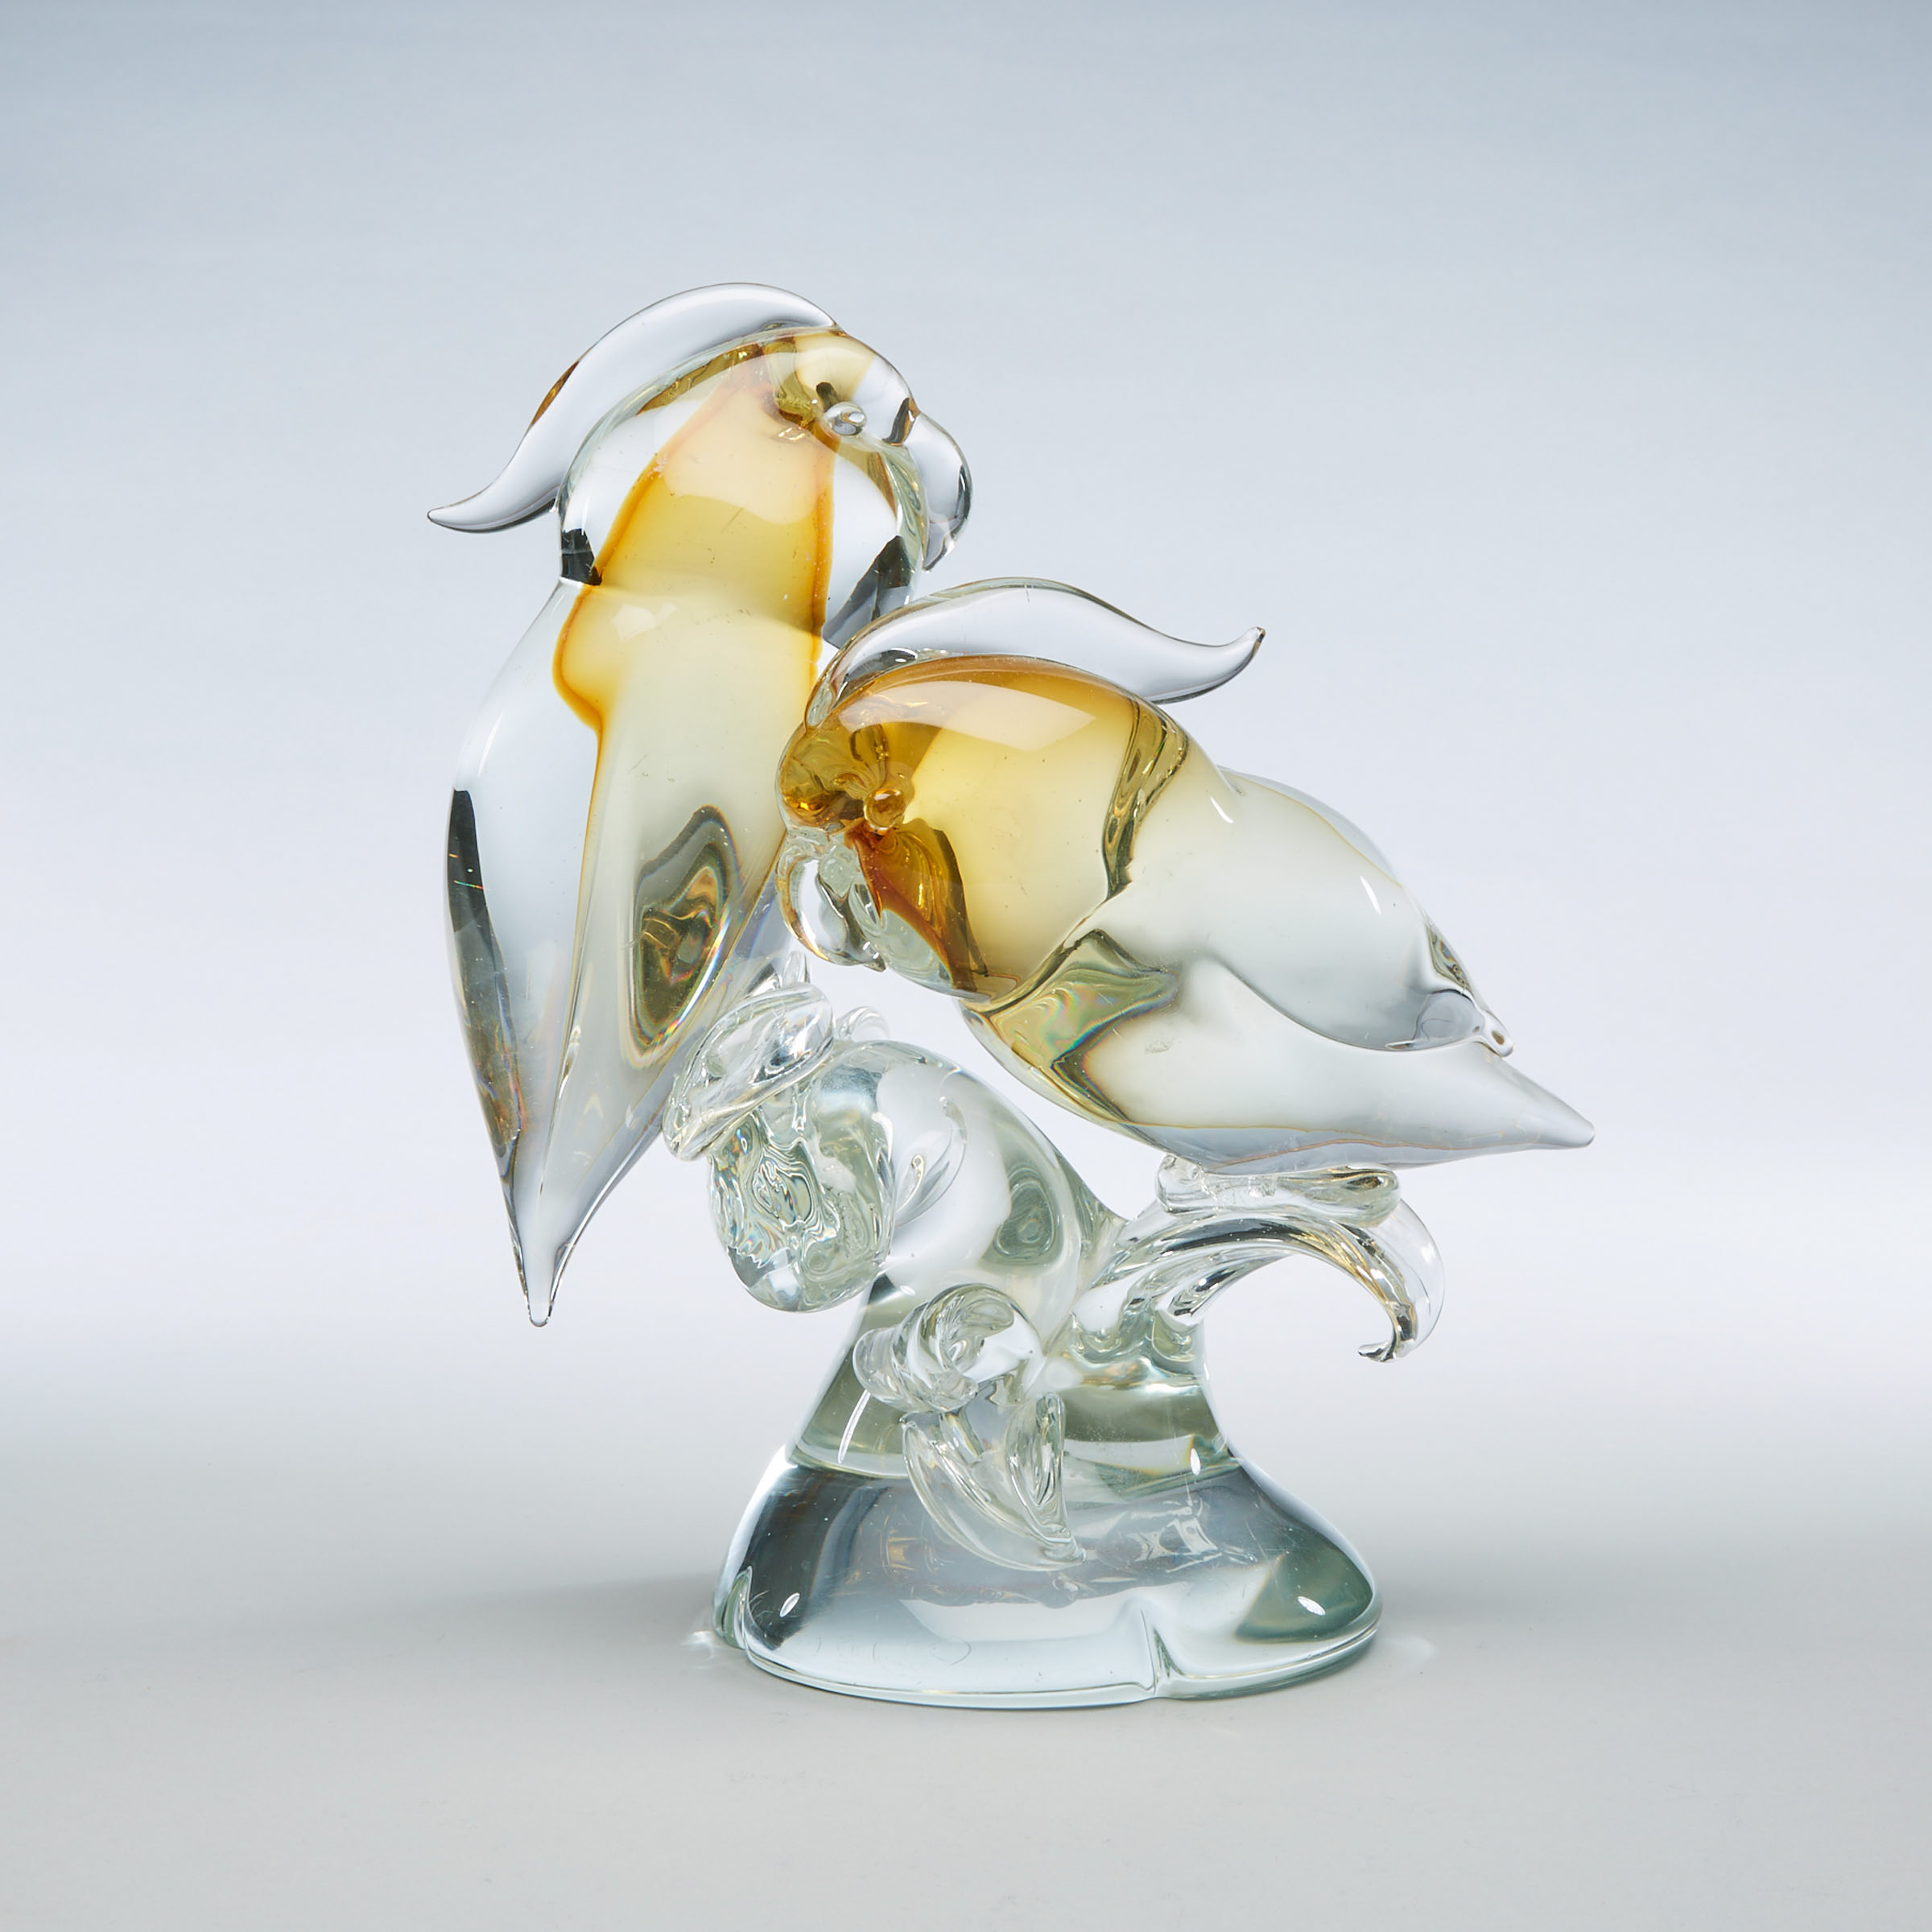 Murano Glass Group of Two Cockatoos, mid-20th century